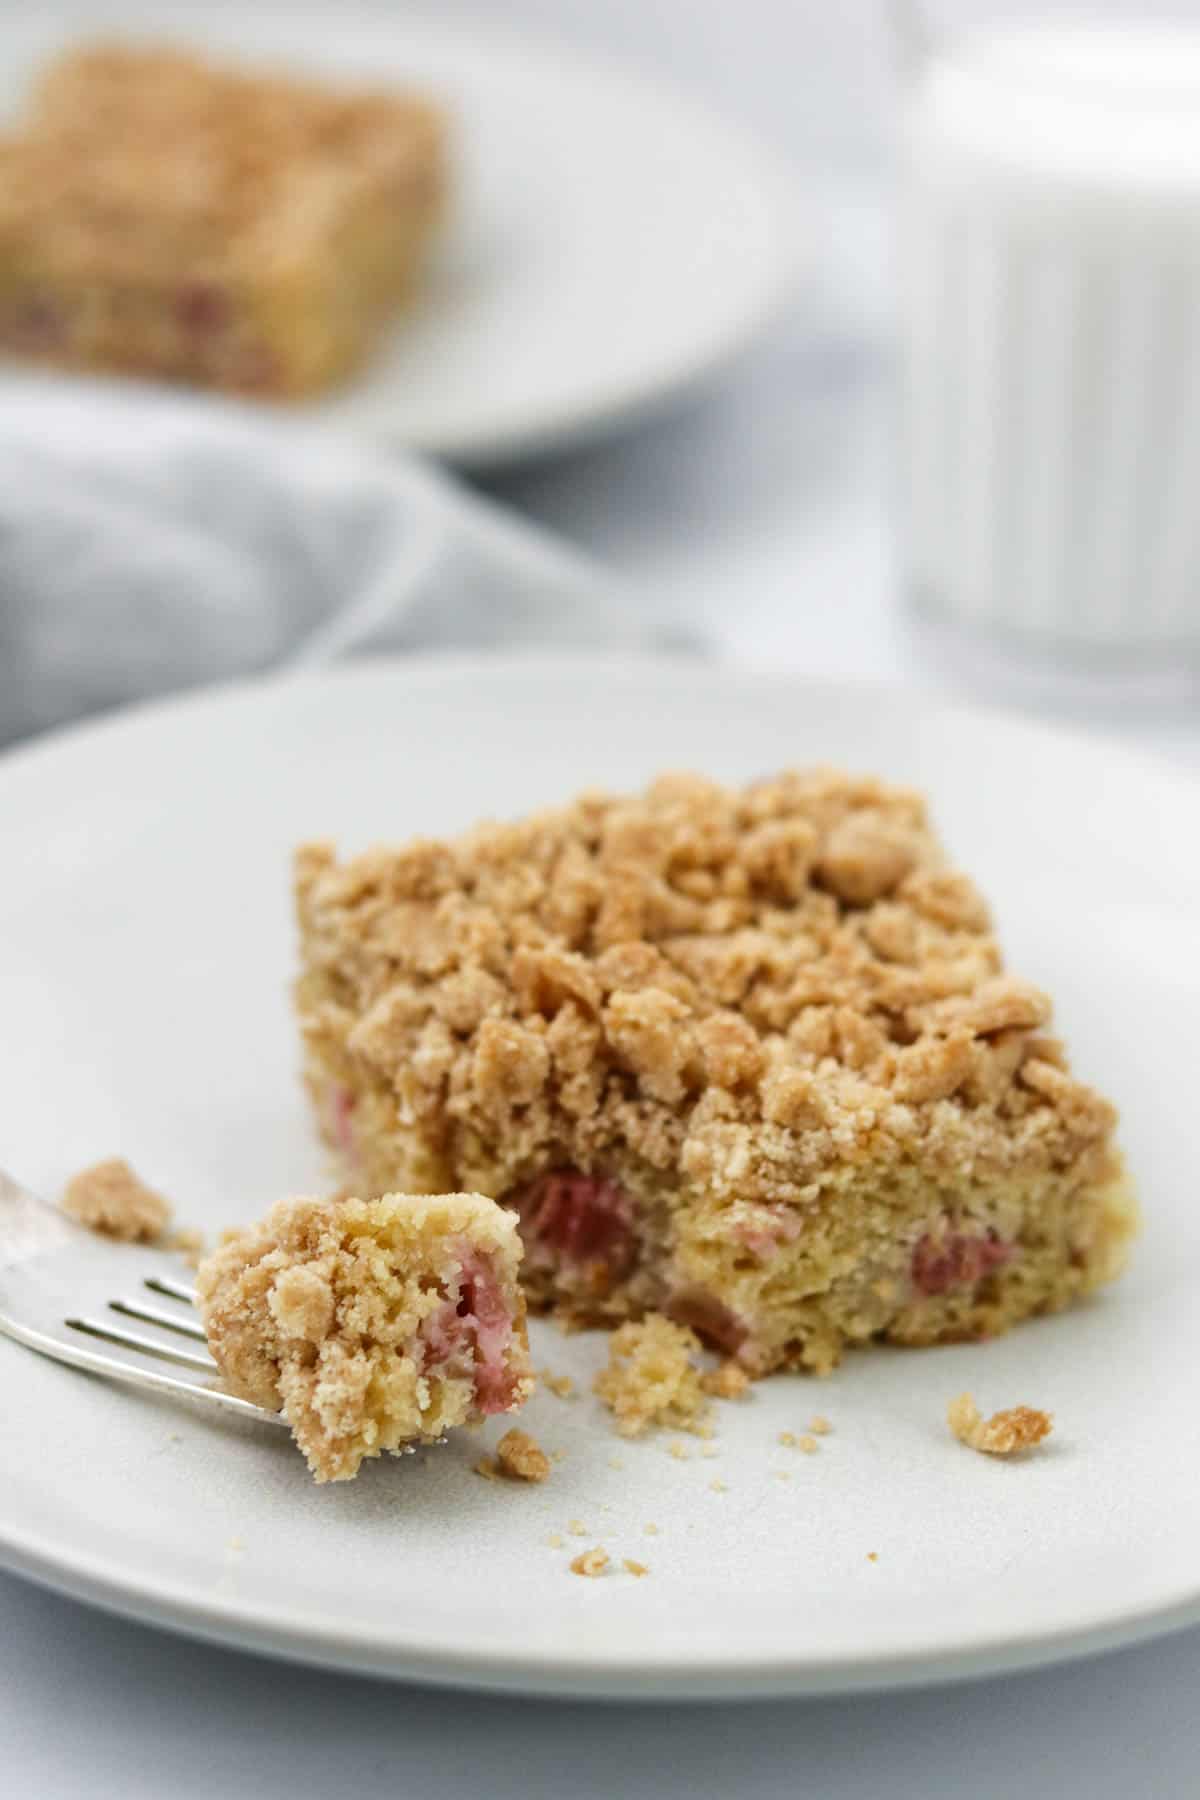 Rhubarb Crumb Cake on a plate with a bite on a fork.